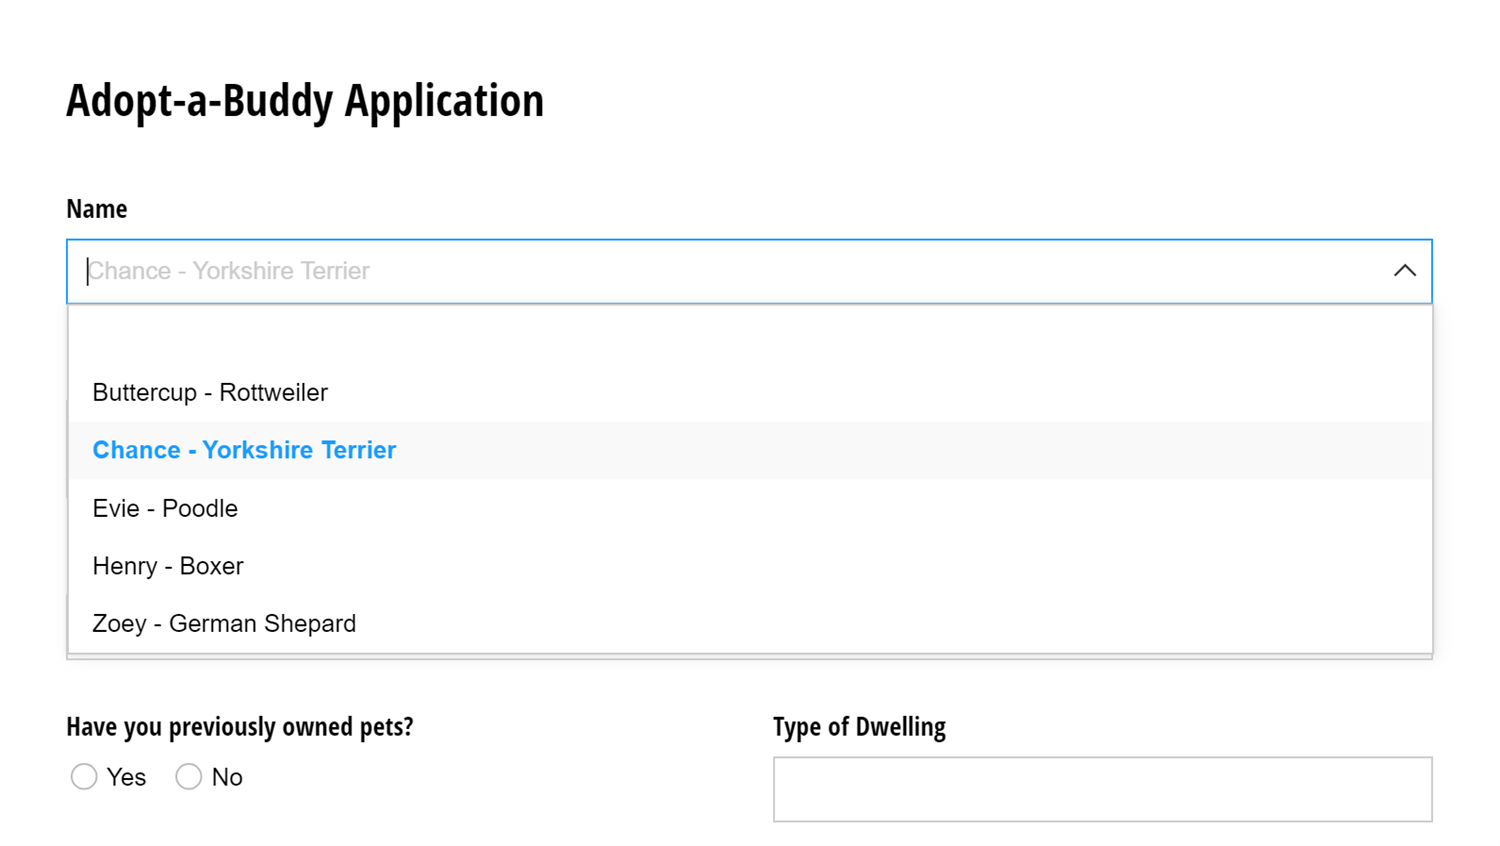 Adoption application form with a Lookup field.